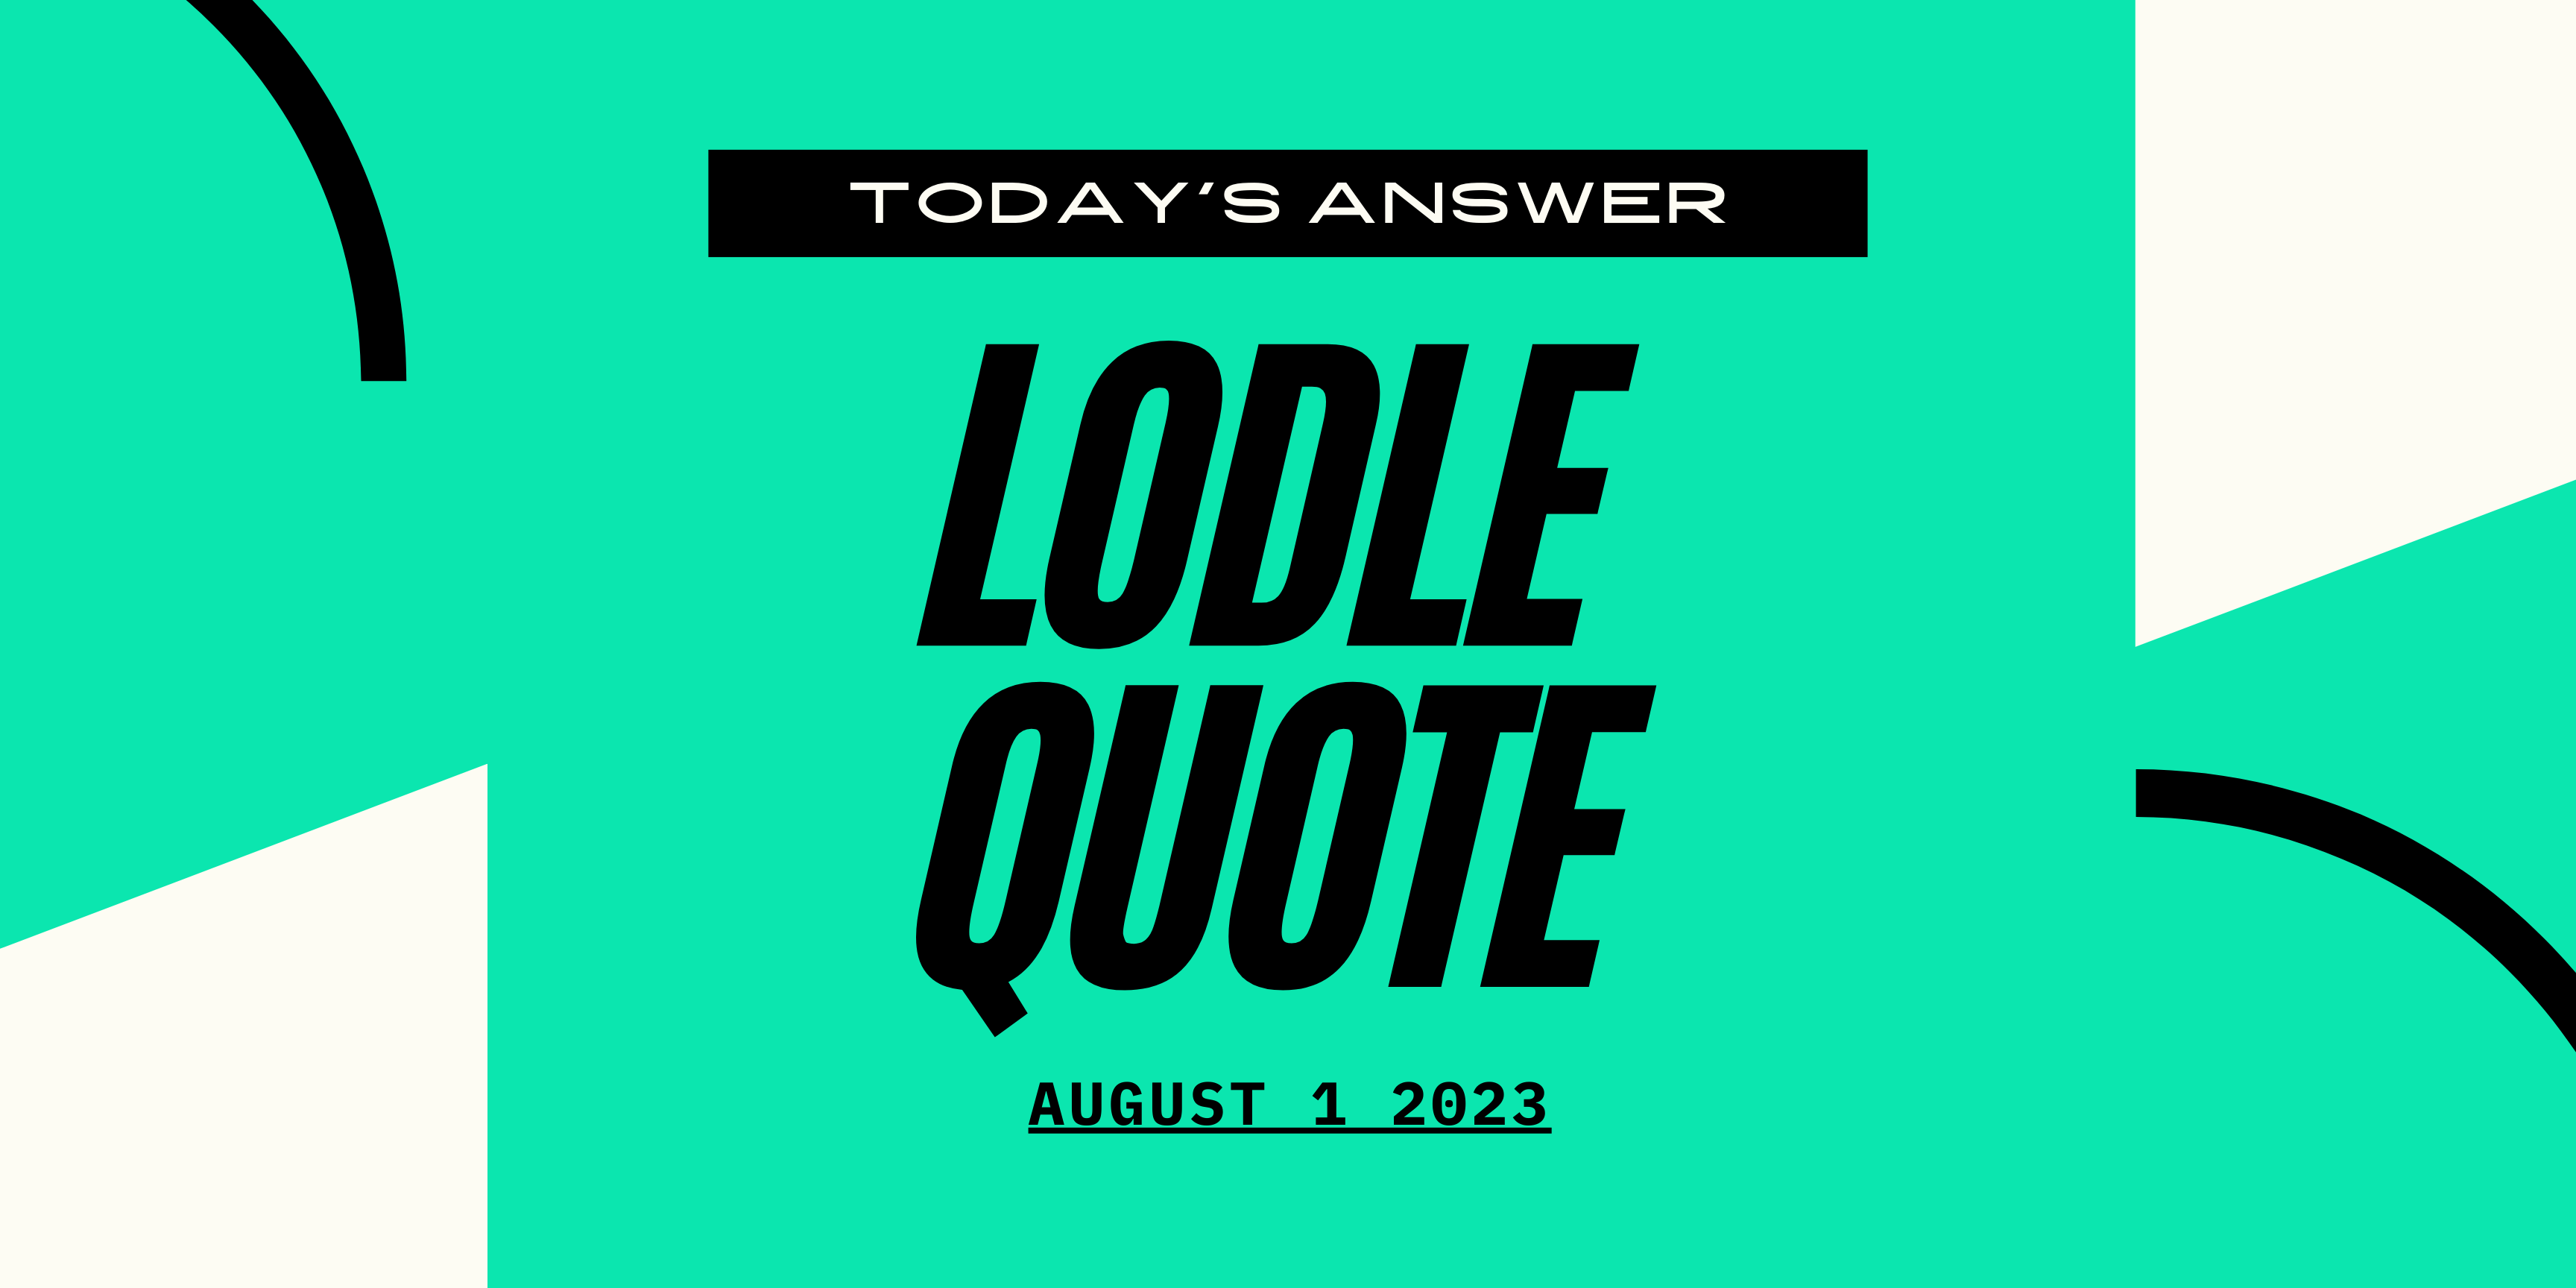 lodle quote august 1